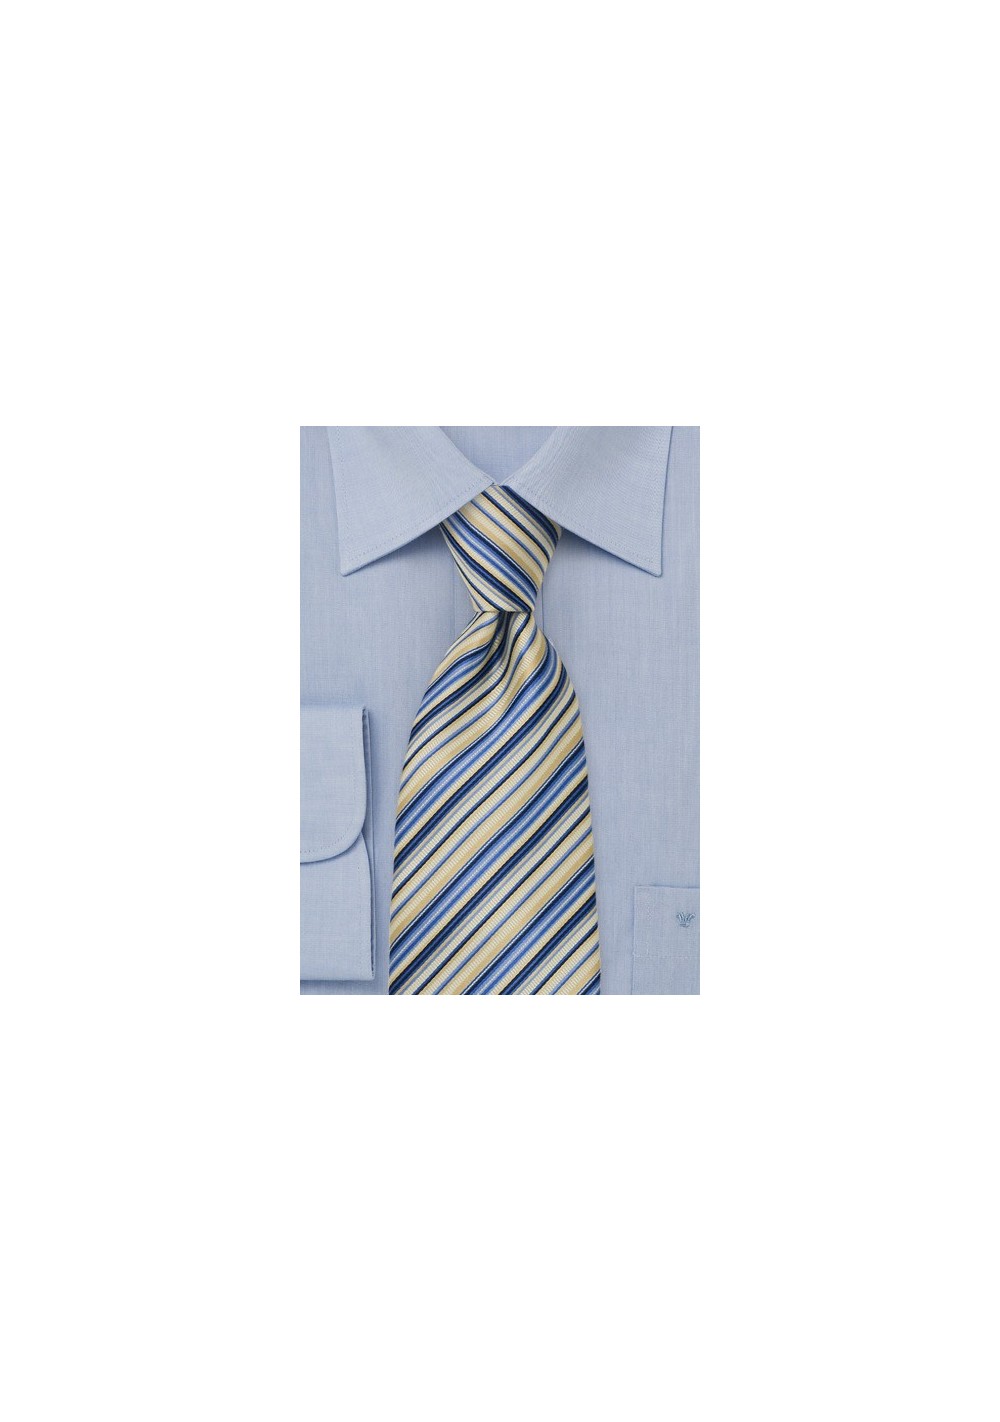 Modern Yellow and Blue Striped Tie by Cavallieri